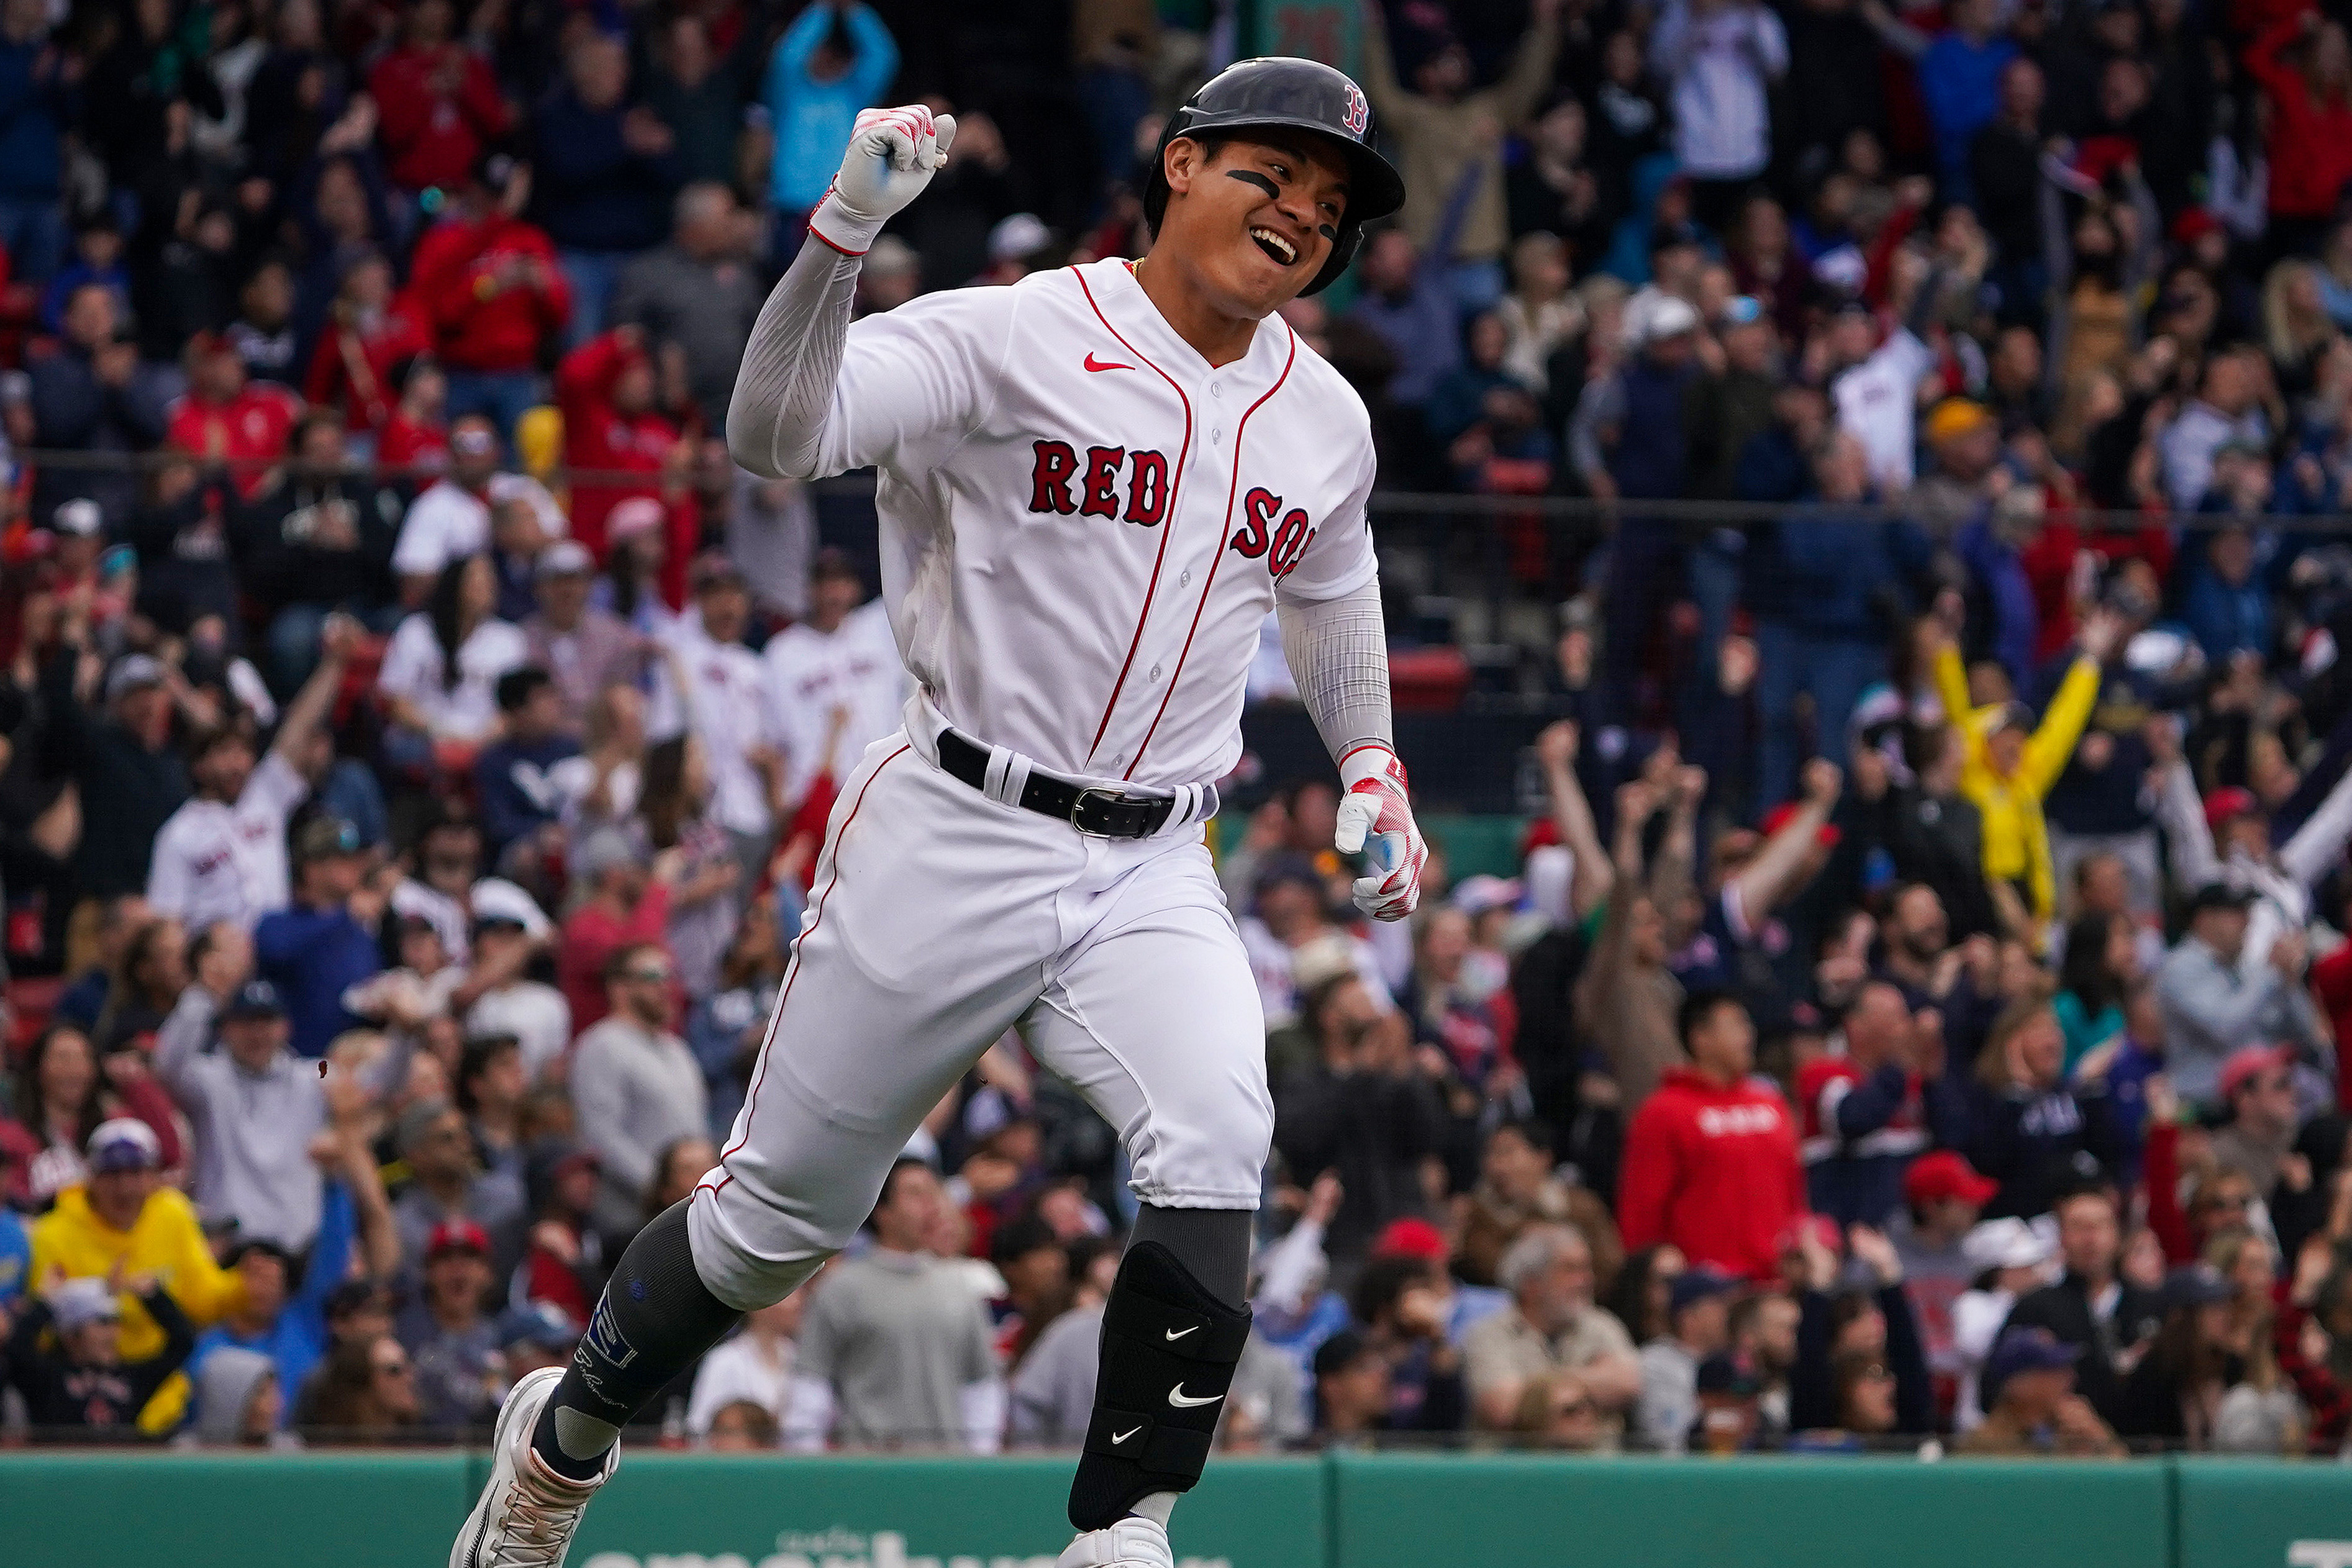 Red Sox catch a couple unexpected breaks to complete comeback victory over Angels